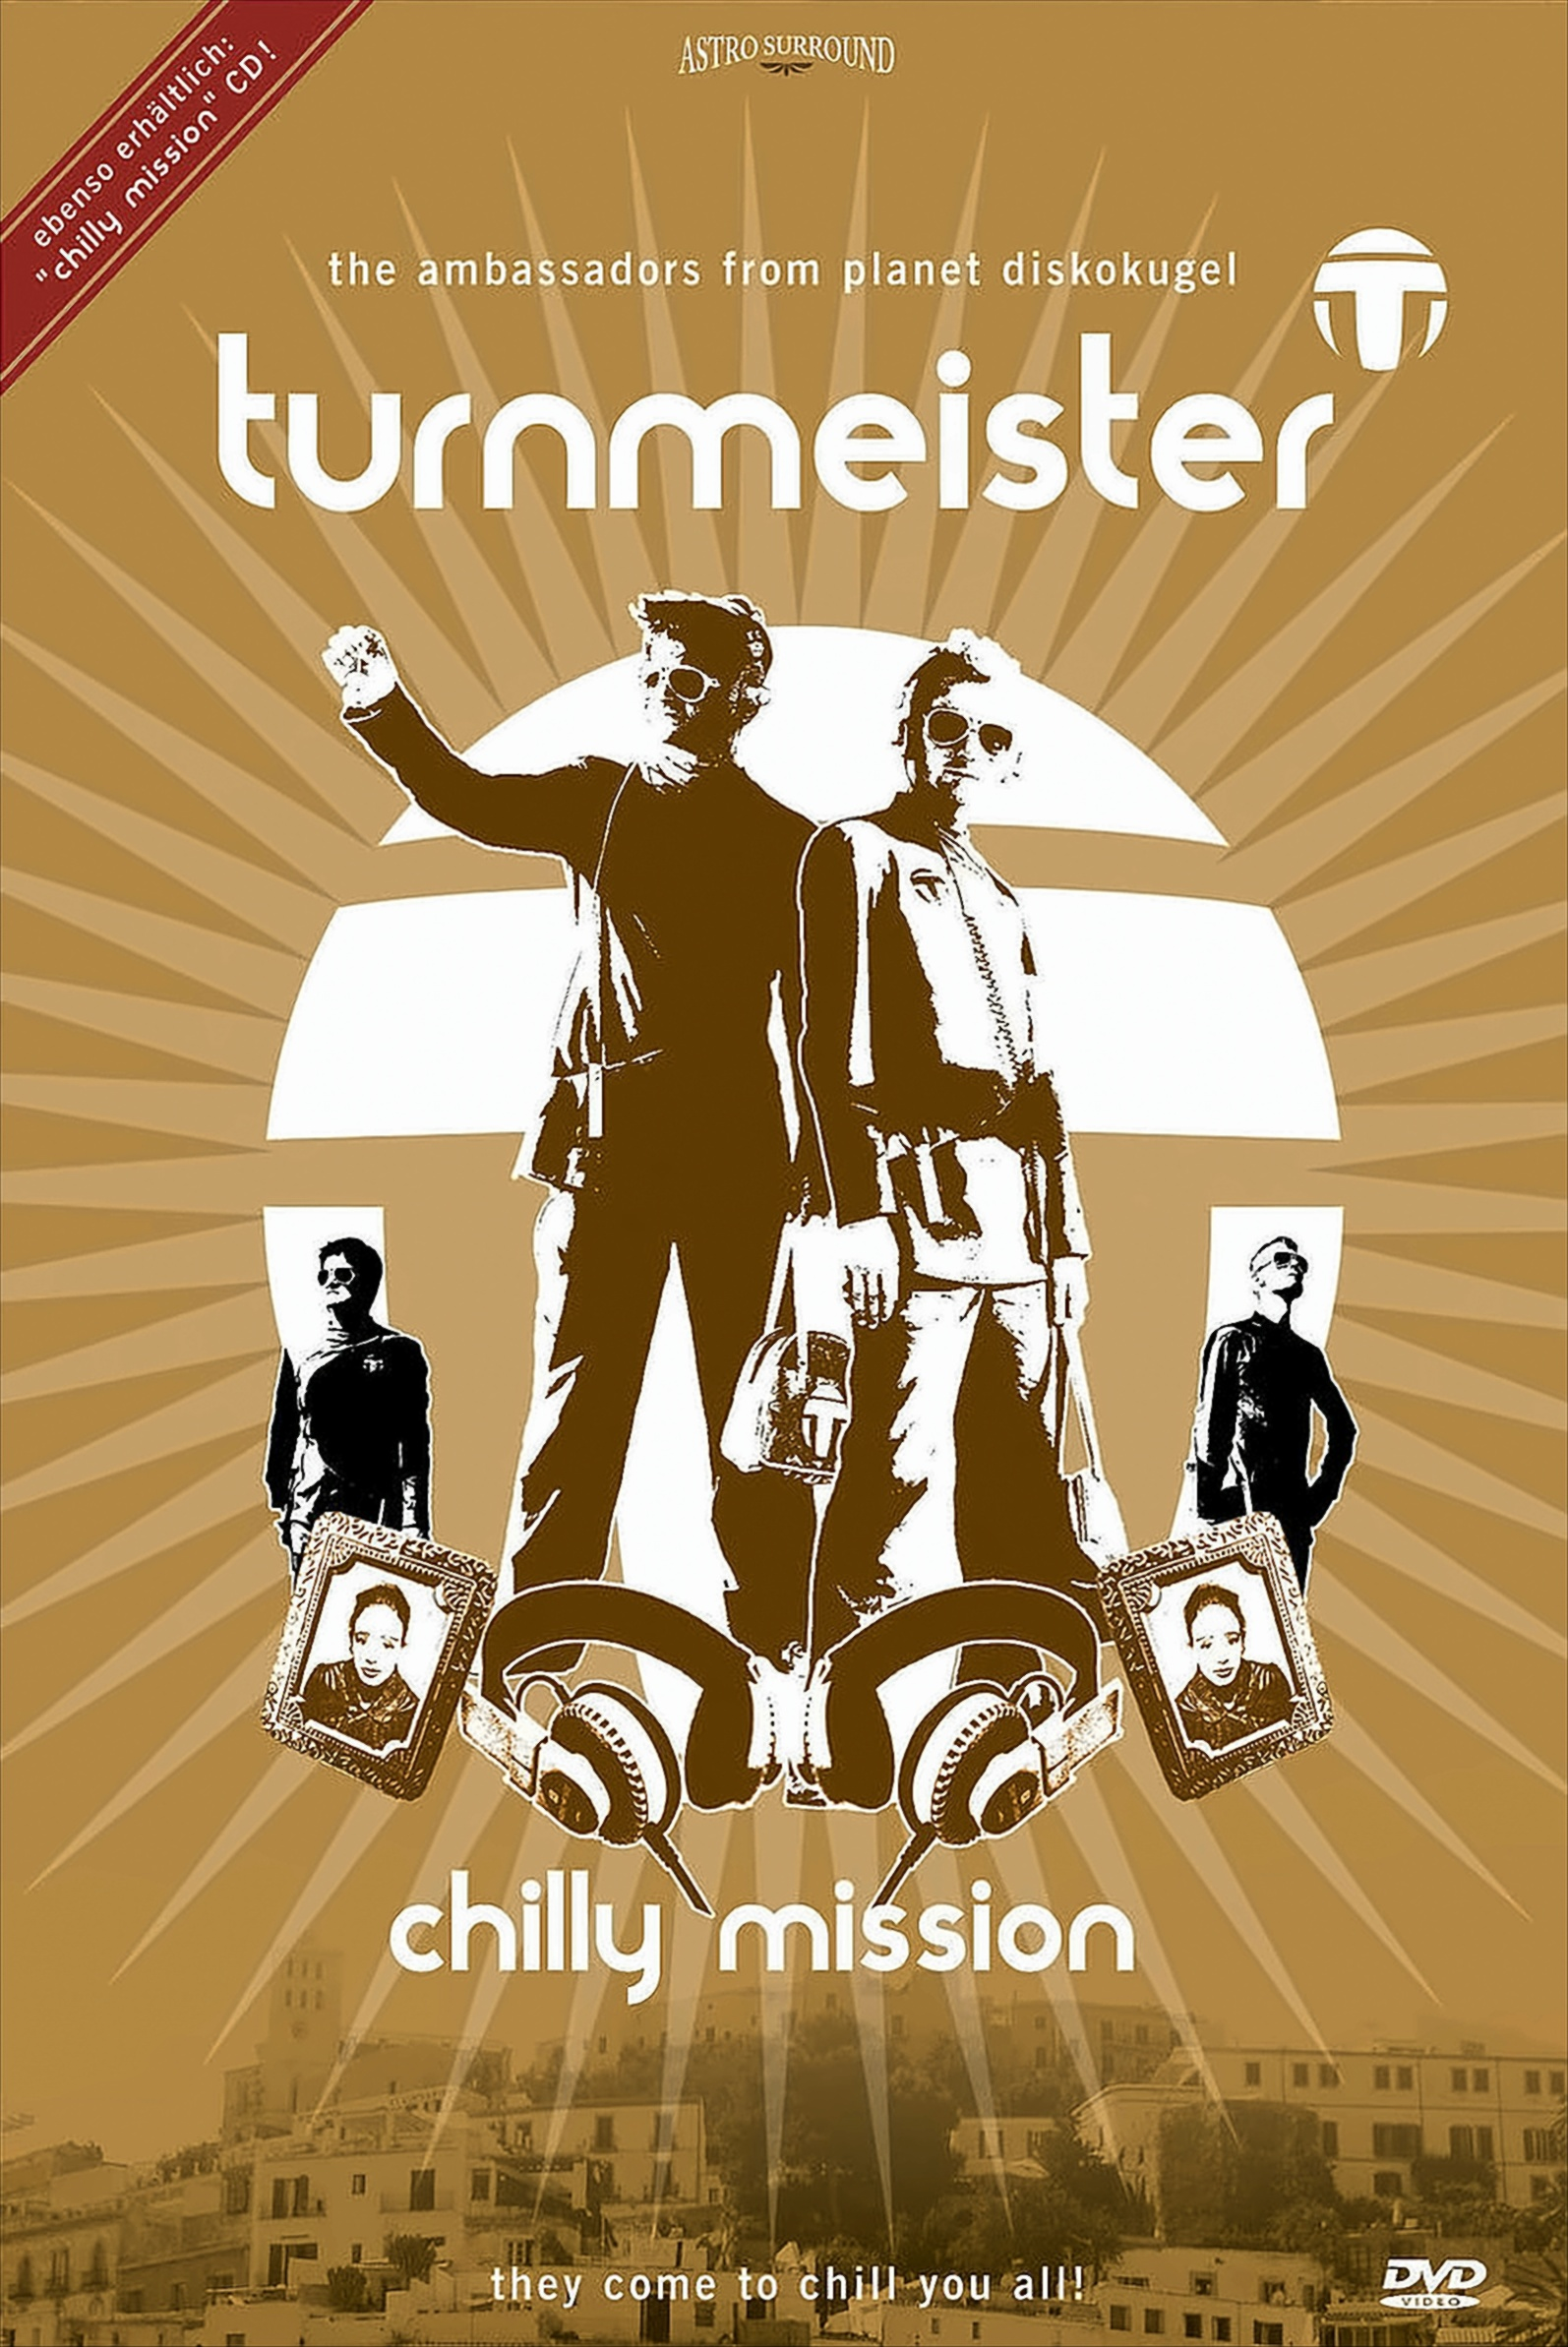 Mission Chilly - DVD Turnmeister